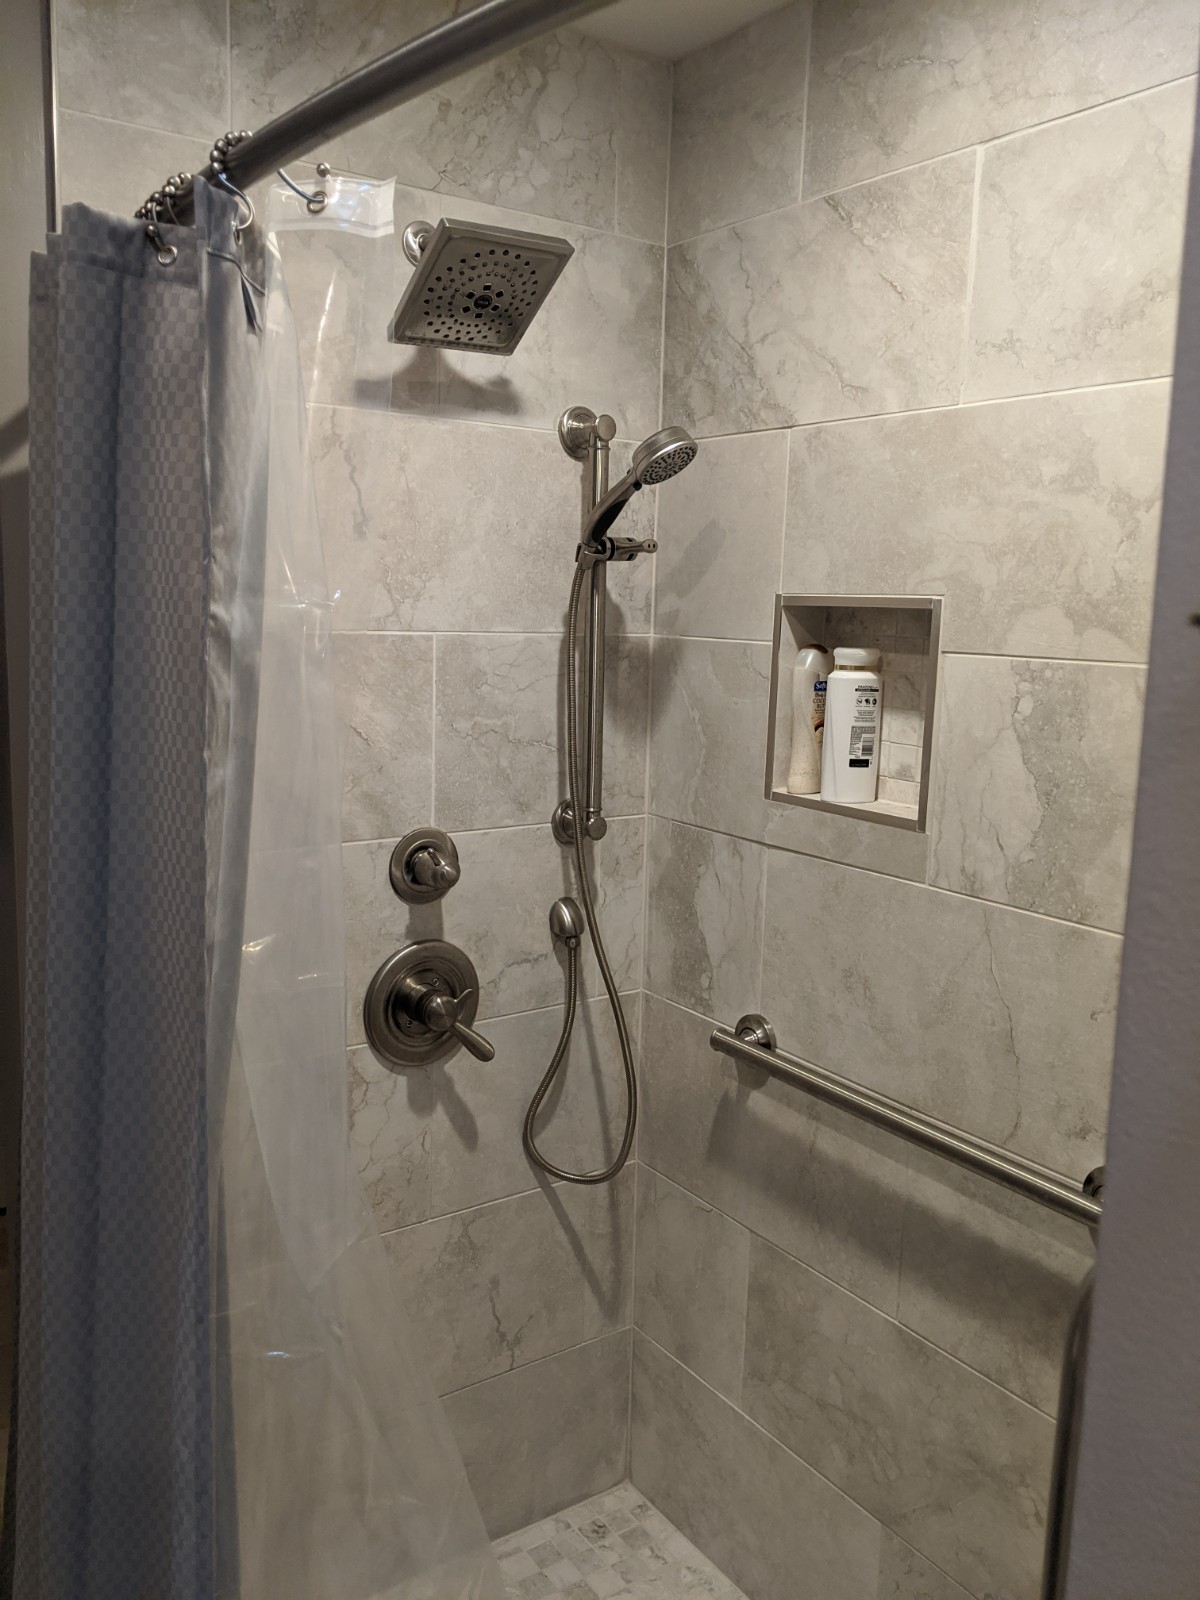 After shower picture, shower has marble style tile in a large format, new grab bars, handheld and shower head